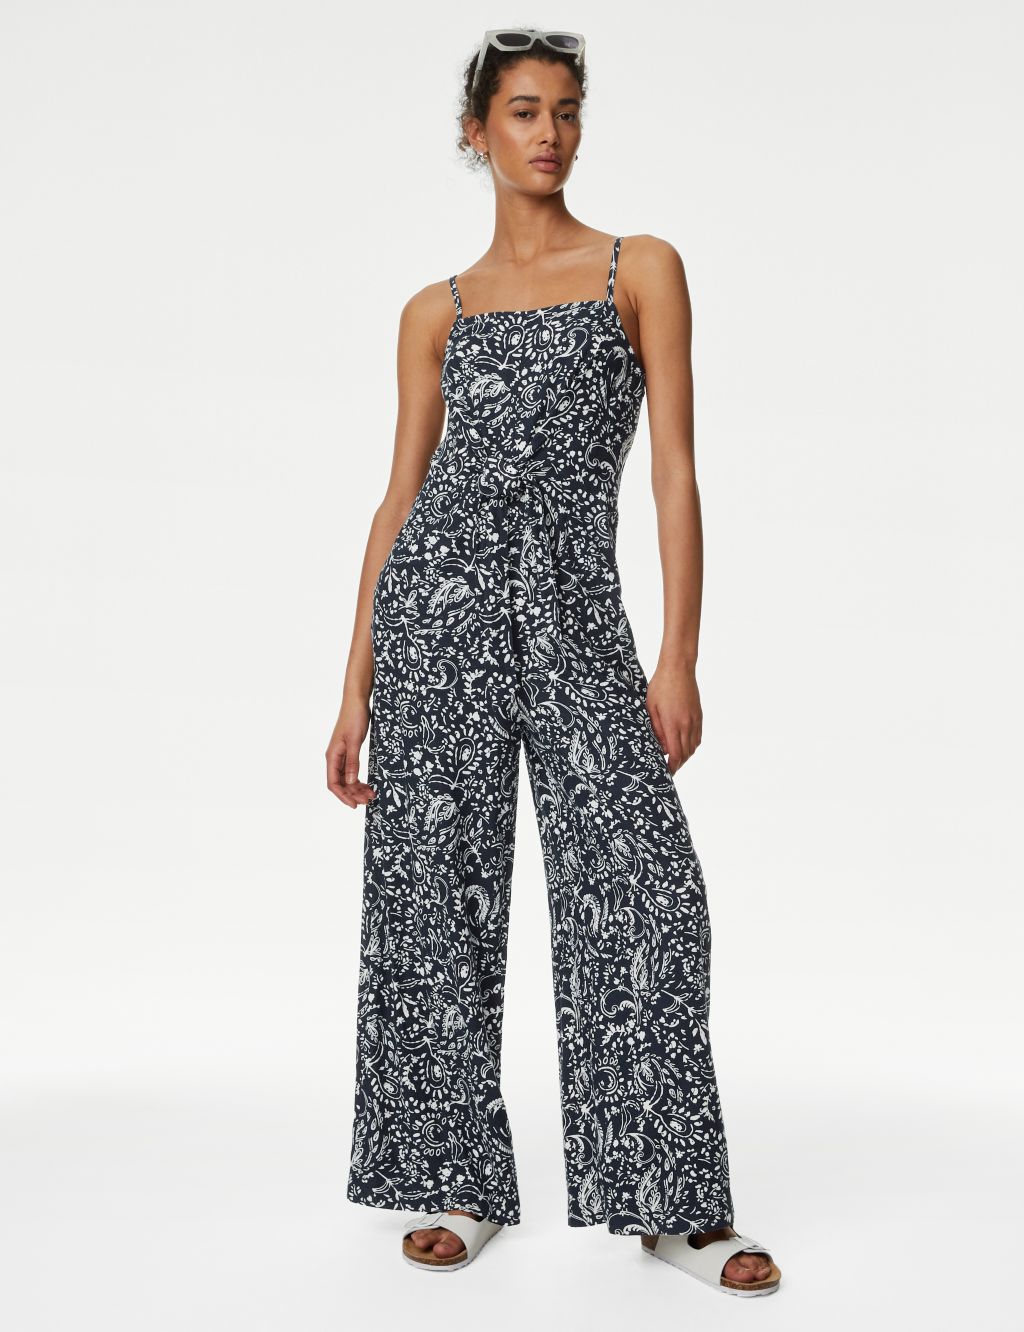 Linen Rich Printed Sleeveless Jumpsuit image 1